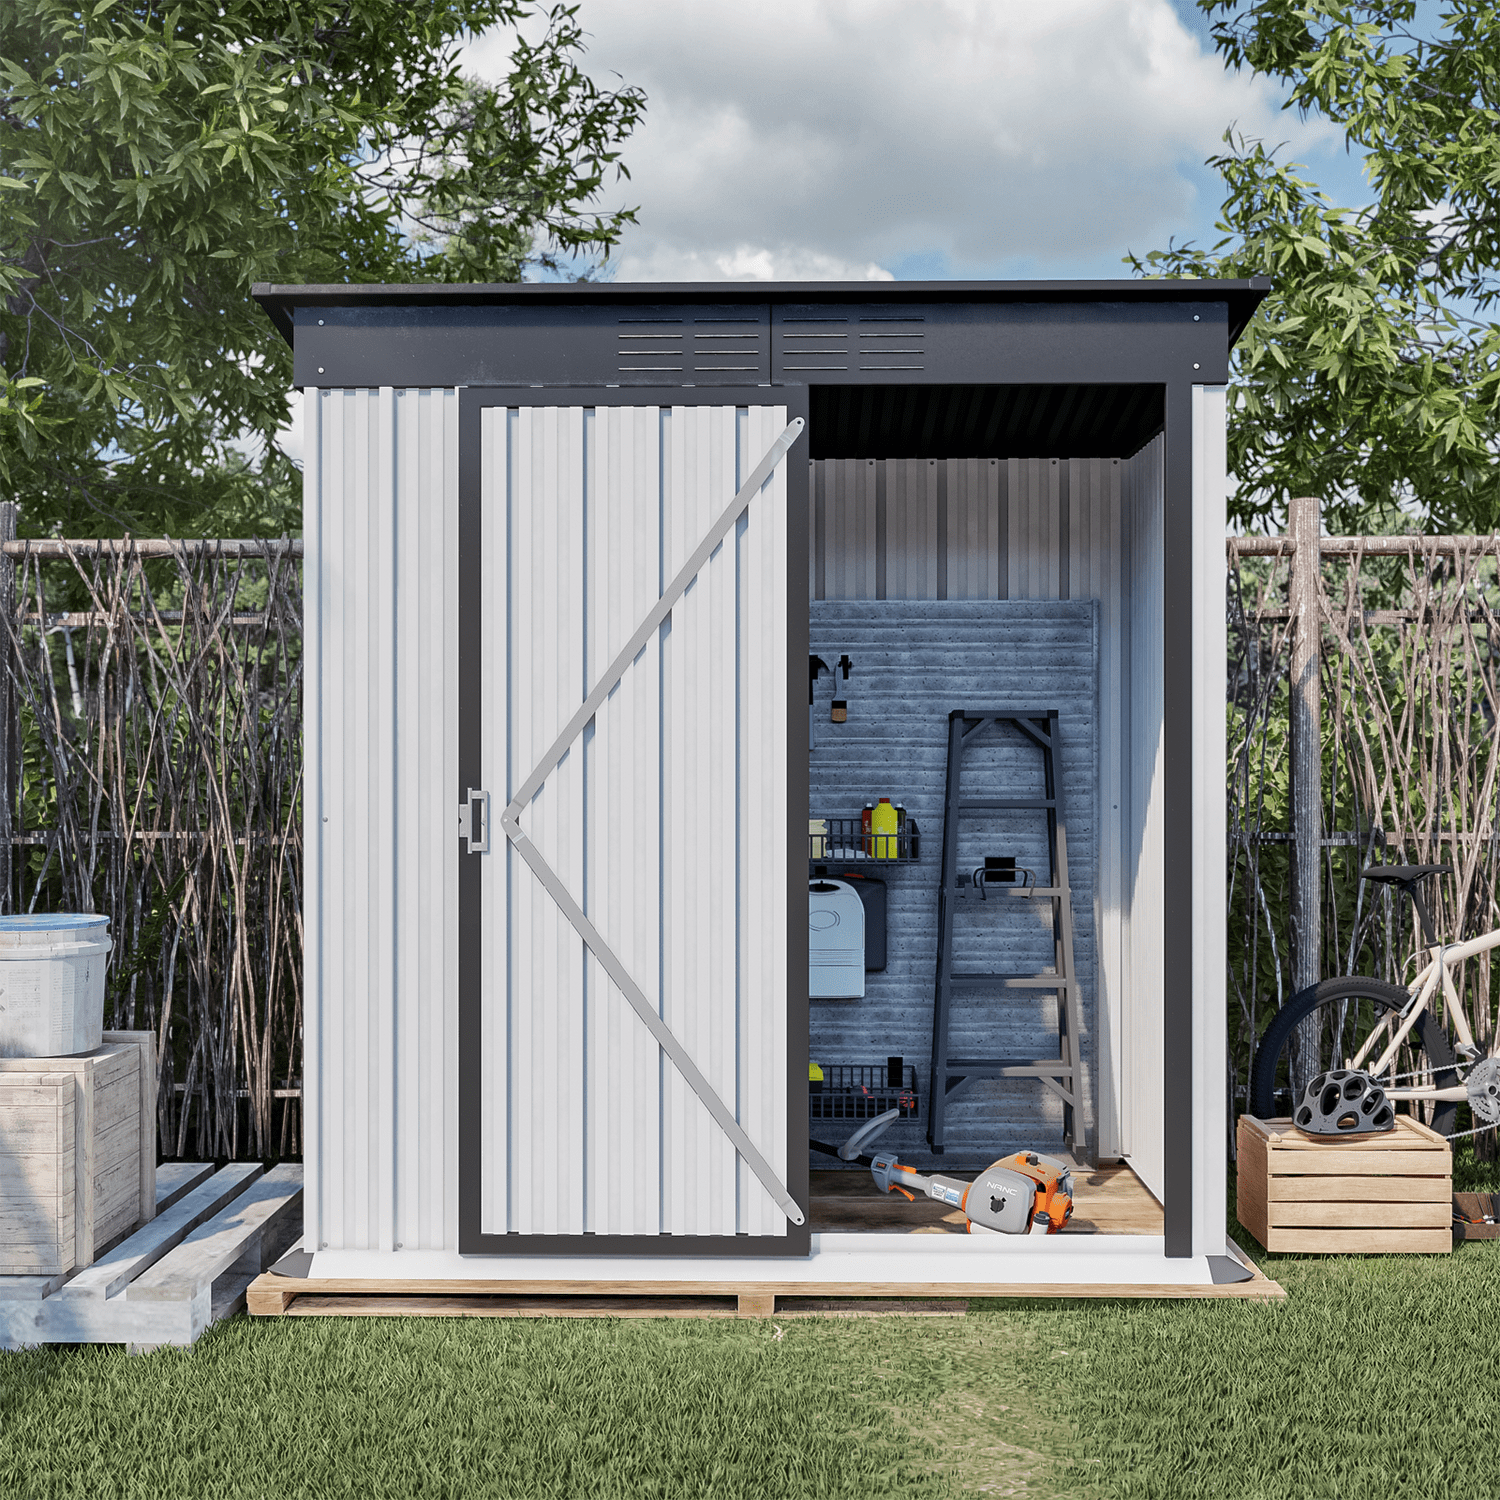 Patio White Lawn Waterproof Tool Storage Shed for Backyard 5ft x 3ft Outdoor Metal Storage Shed，Sun Protection 